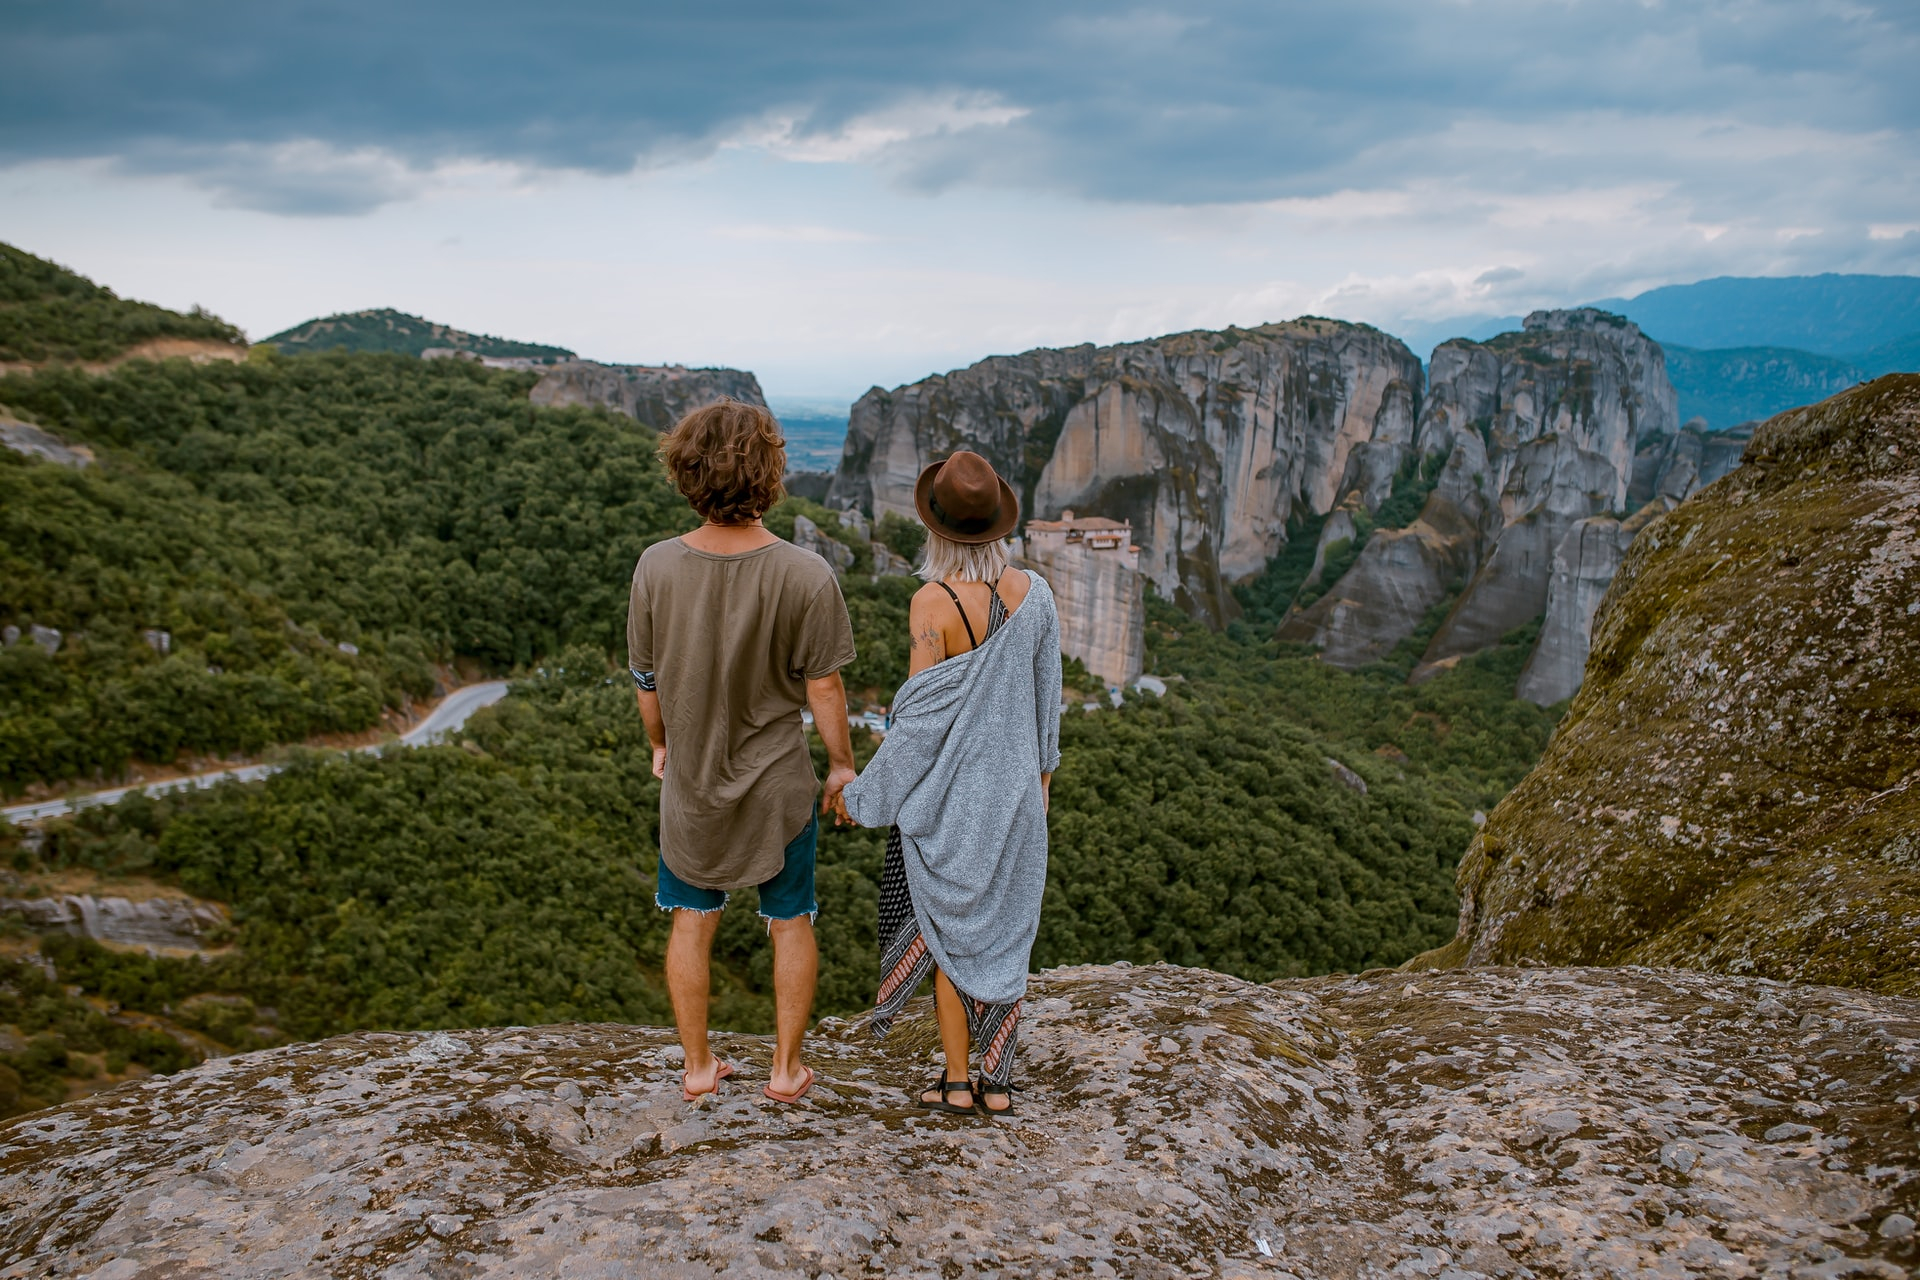 Surprise trip for your spouse overlooking a mountain valley toa-heftiba-i3x7NdbVqOI-unsplash